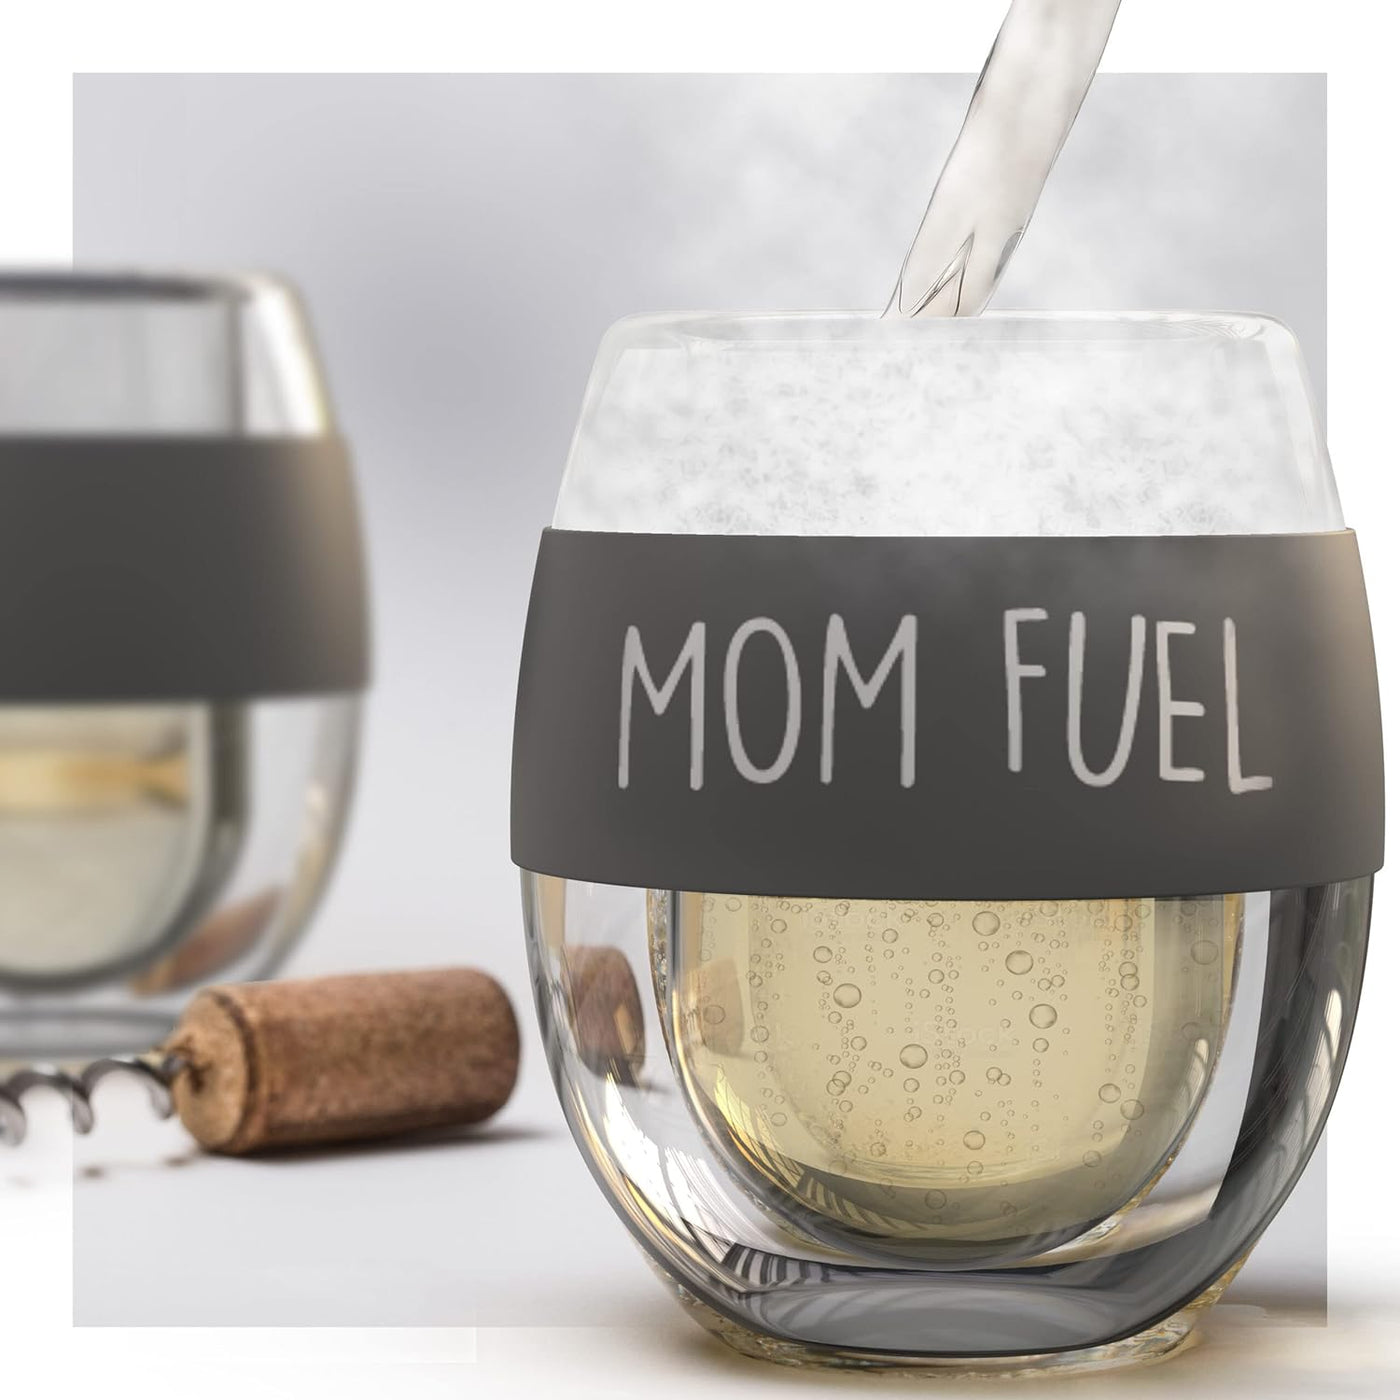 Stemless Freezer Wine Glass "MOM FUEL" Liquid-Freeze Gel Insulated Chiller Cup - Unique Gift for Mom/Mothers Day/Birthday/Christmas (8.5oz)